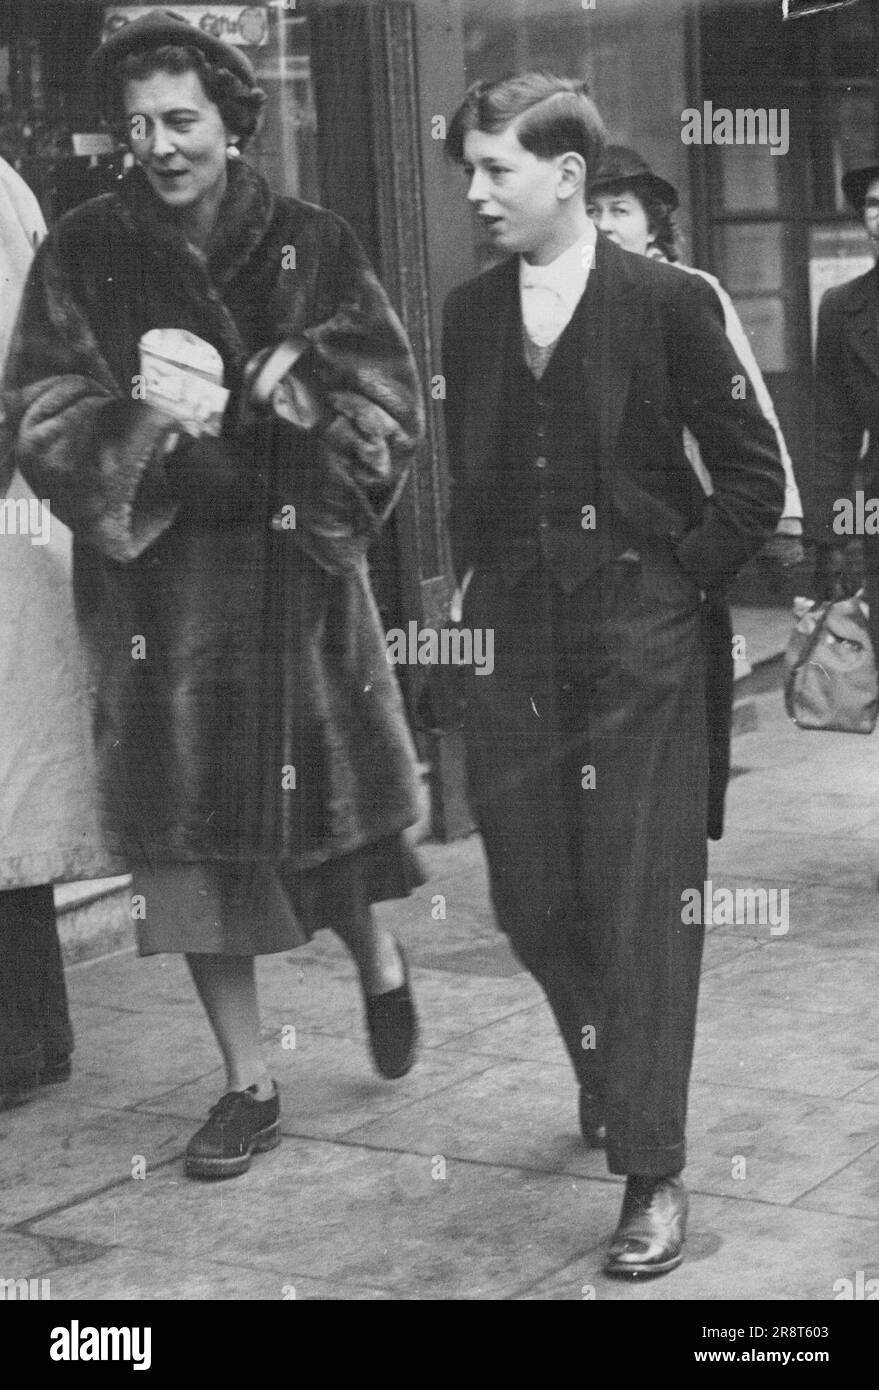 Shoppers - Wearing the traditional Eton ***** Duke of Kent goes Christmas shopping in ***** with his mother, the Duchess of Kent. The Royal pair mingled with shoppers unnoticed. December 17, 1949. Stock Photo